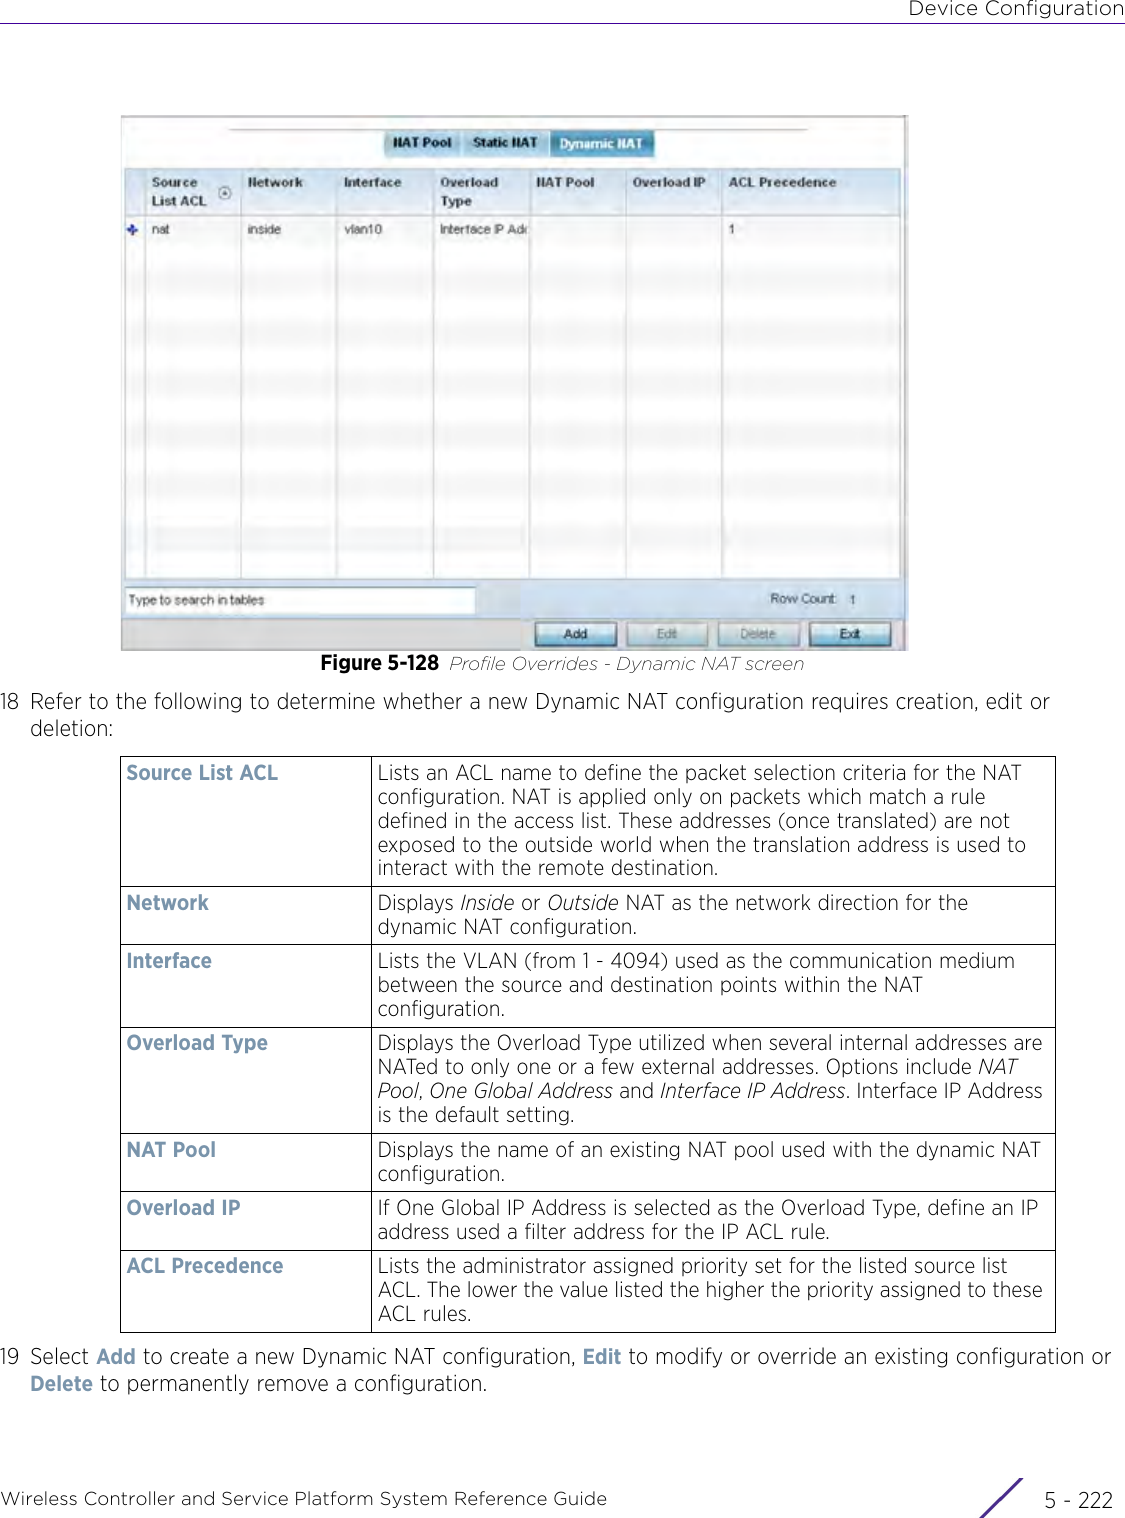 Device ConfigurationWireless Controller and Service Platform System Reference Guide  5 - 222Figure 5-128 Profile Overrides - Dynamic NAT screen18 Refer to the following to determine whether a new Dynamic NAT configuration requires creation, edit or deletion:19 Select Add to create a new Dynamic NAT configuration, Edit to modify or override an existing configuration or Delete to permanently remove a configuration.Source List ACL Lists an ACL name to define the packet selection criteria for the NAT configuration. NAT is applied only on packets which match a rule defined in the access list. These addresses (once translated) are not exposed to the outside world when the translation address is used to interact with the remote destination.Network Displays Inside or Outside NAT as the network direction for the dynamic NAT configuration. Interface Lists the VLAN (from 1 - 4094) used as the communication medium between the source and destination points within the NAT configuration. Overload Type Displays the Overload Type utilized when several internal addresses are NATed to only one or a few external addresses. Options include NAT Pool, One Global Address and Interface IP Address. Interface IP Address is the default setting.NAT Pool Displays the name of an existing NAT pool used with the dynamic NAT configuration. Overload IP If One Global IP Address is selected as the Overload Type, define an IP address used a filter address for the IP ACL rule.ACL Precedence Lists the administrator assigned priority set for the listed source list ACL. The lower the value listed the higher the priority assigned to these ACL rules.